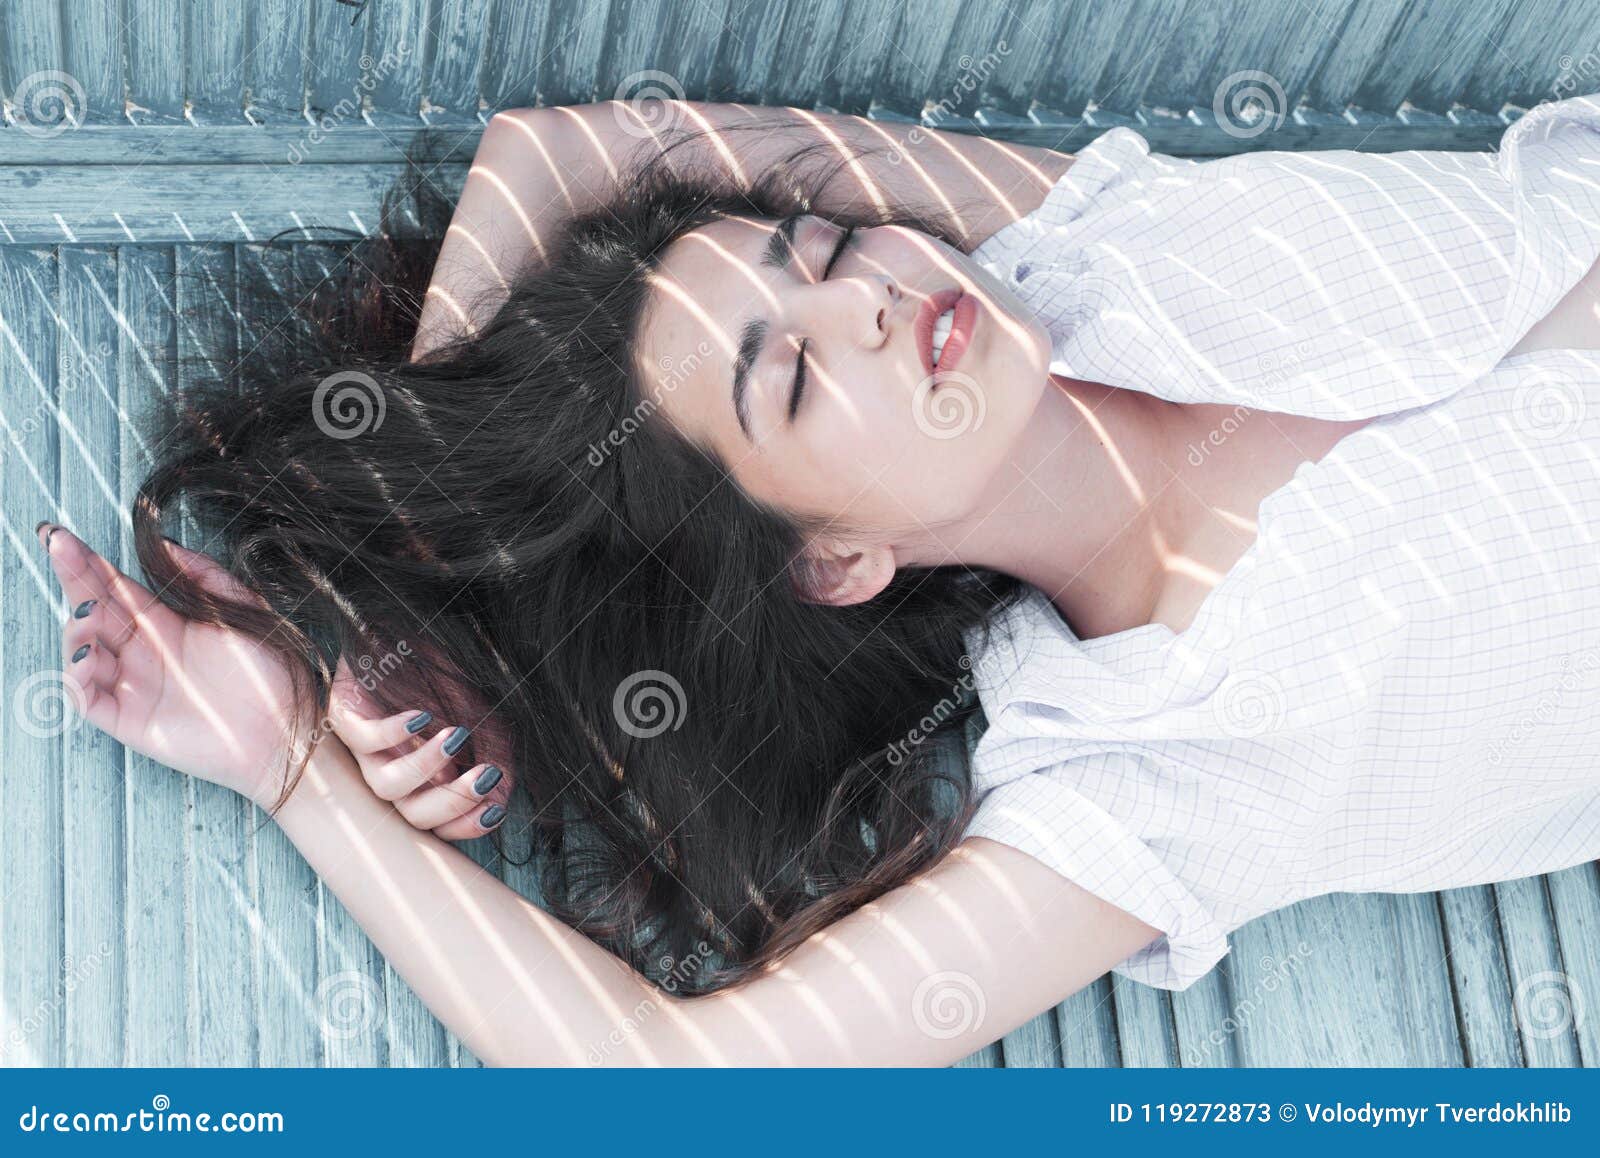 Sleeping Beauty. Woman with Long Hair Sleep on Bench. Arabian Woman Relax  with Closed Eyes, Pure Look Stock Image - Image of beauty, cute: 119272873